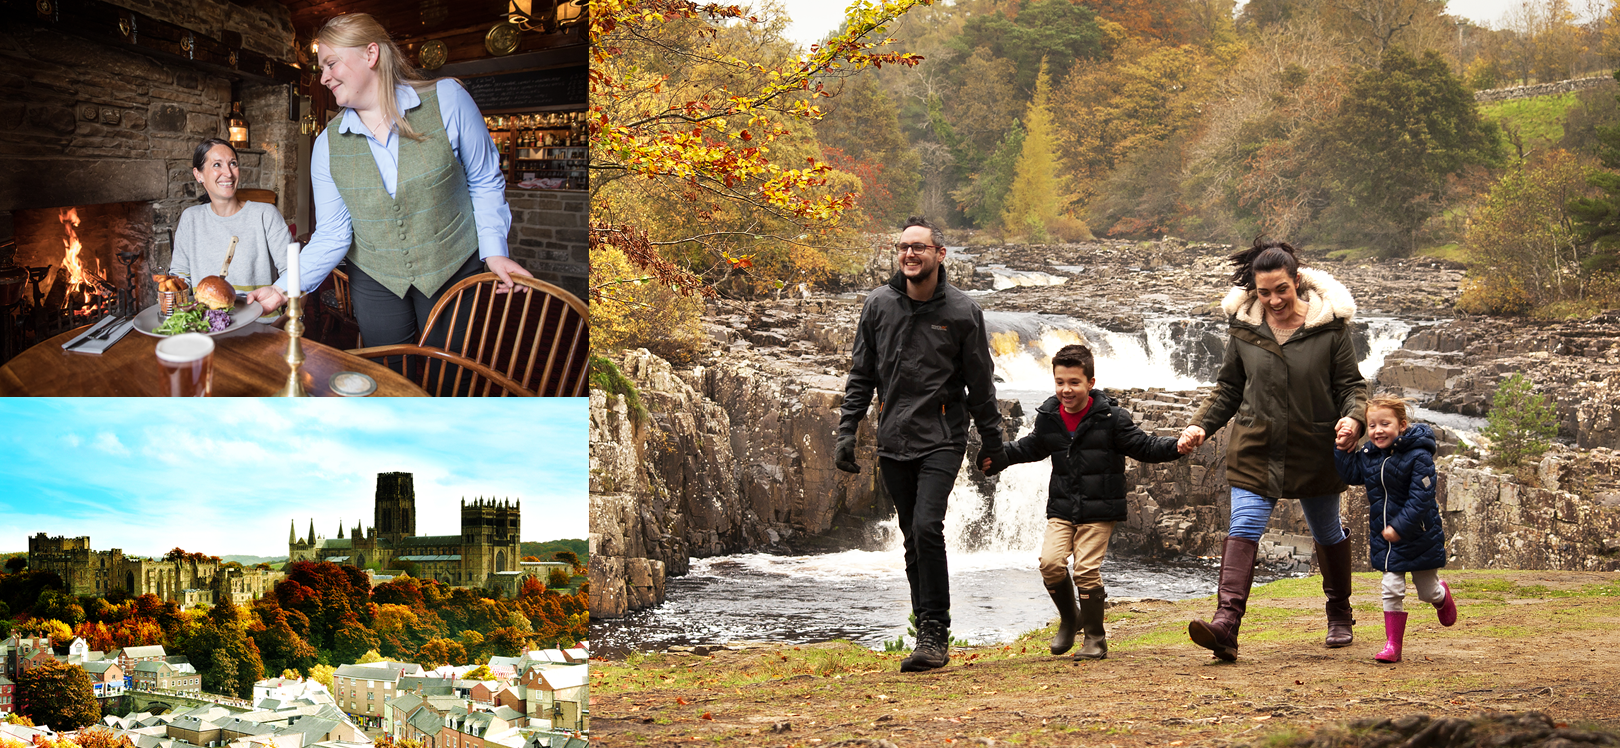 A family playing in leaves at High Force, Durham Cathedral in autumn and people serving and eating food